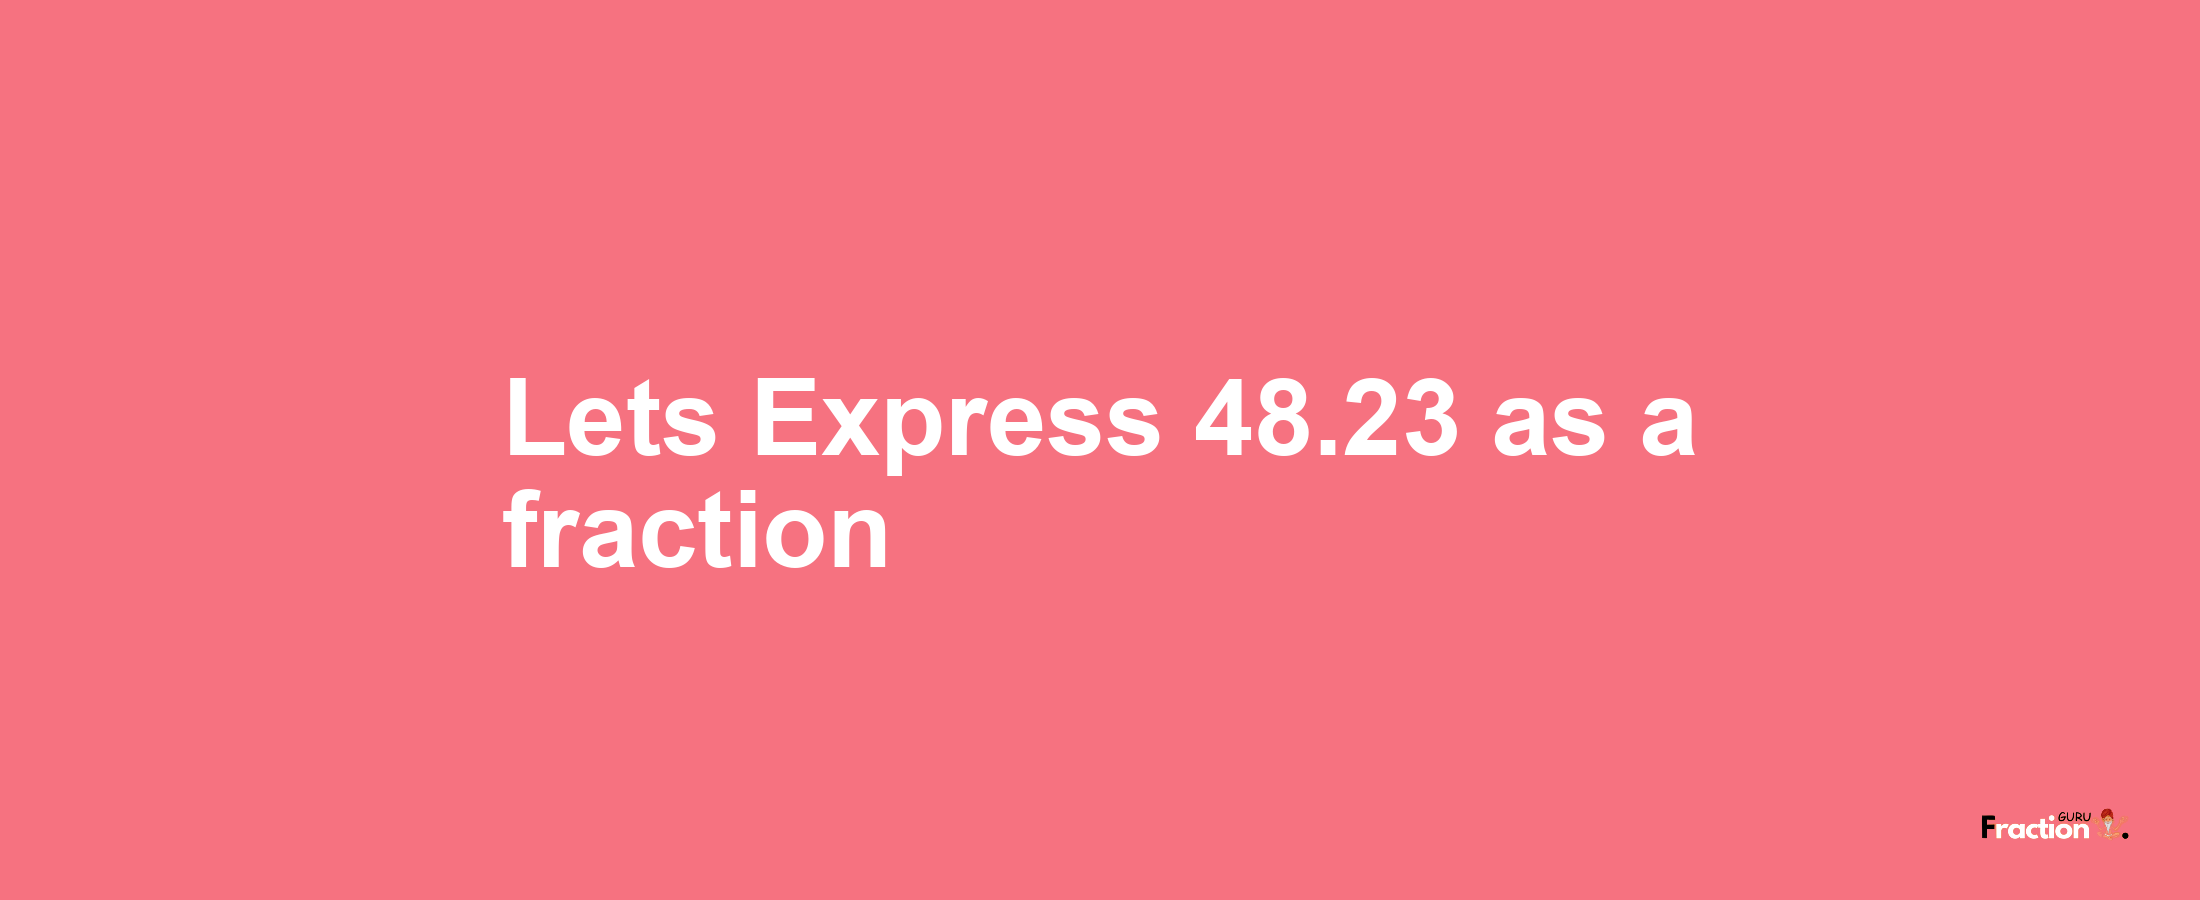 Lets Express 48.23 as afraction